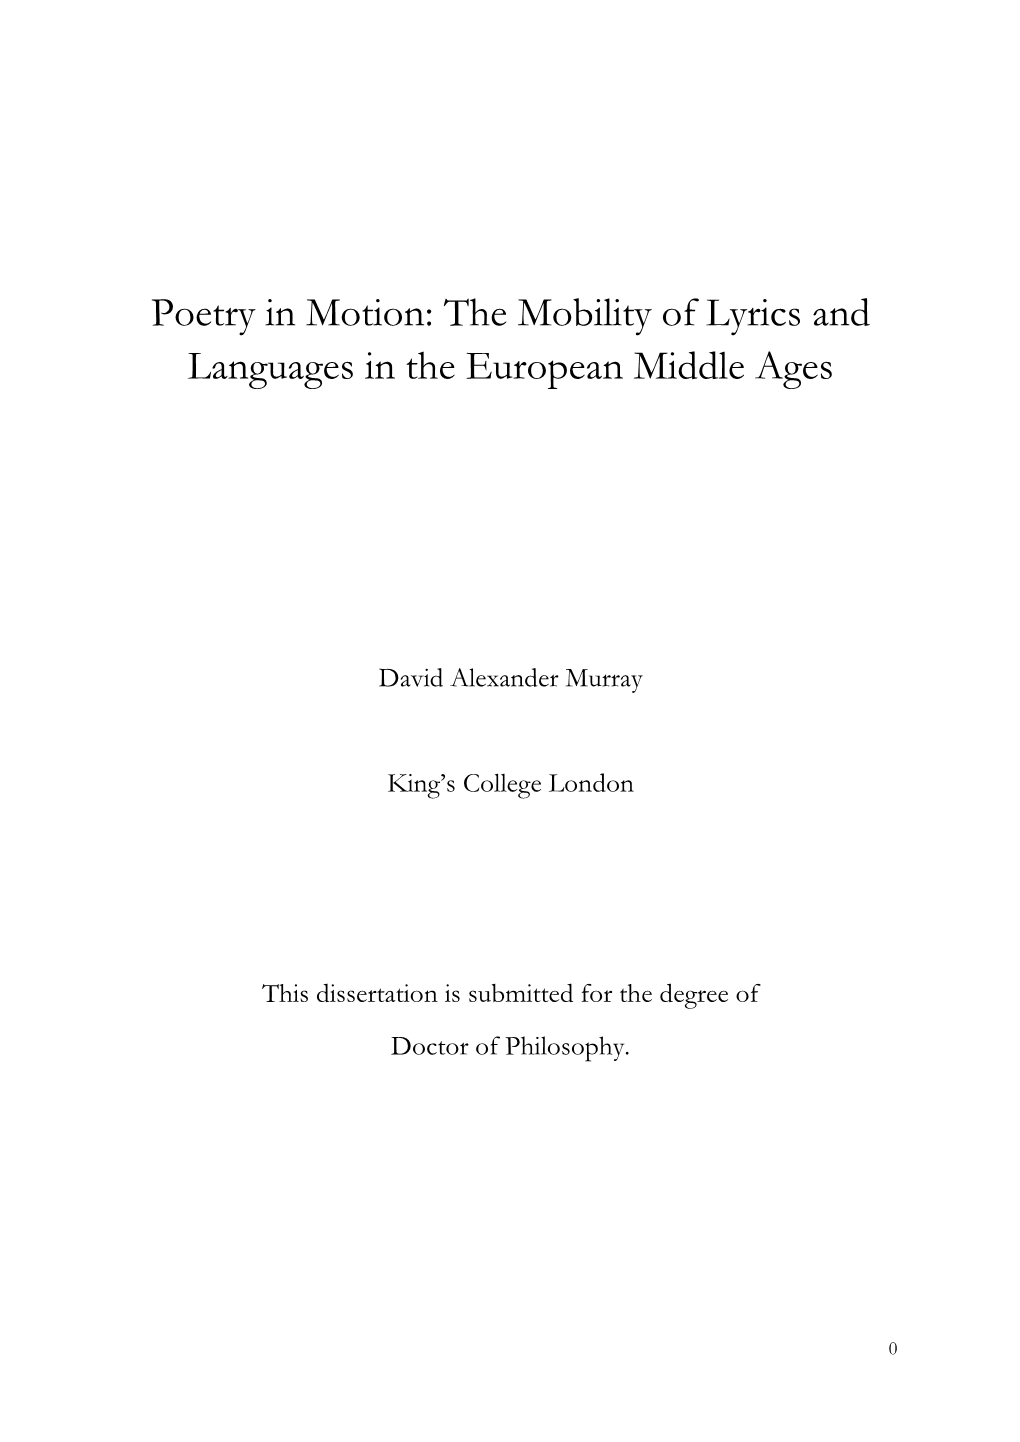 The Mobility of Lyrics and Languages in the European Middle Ages